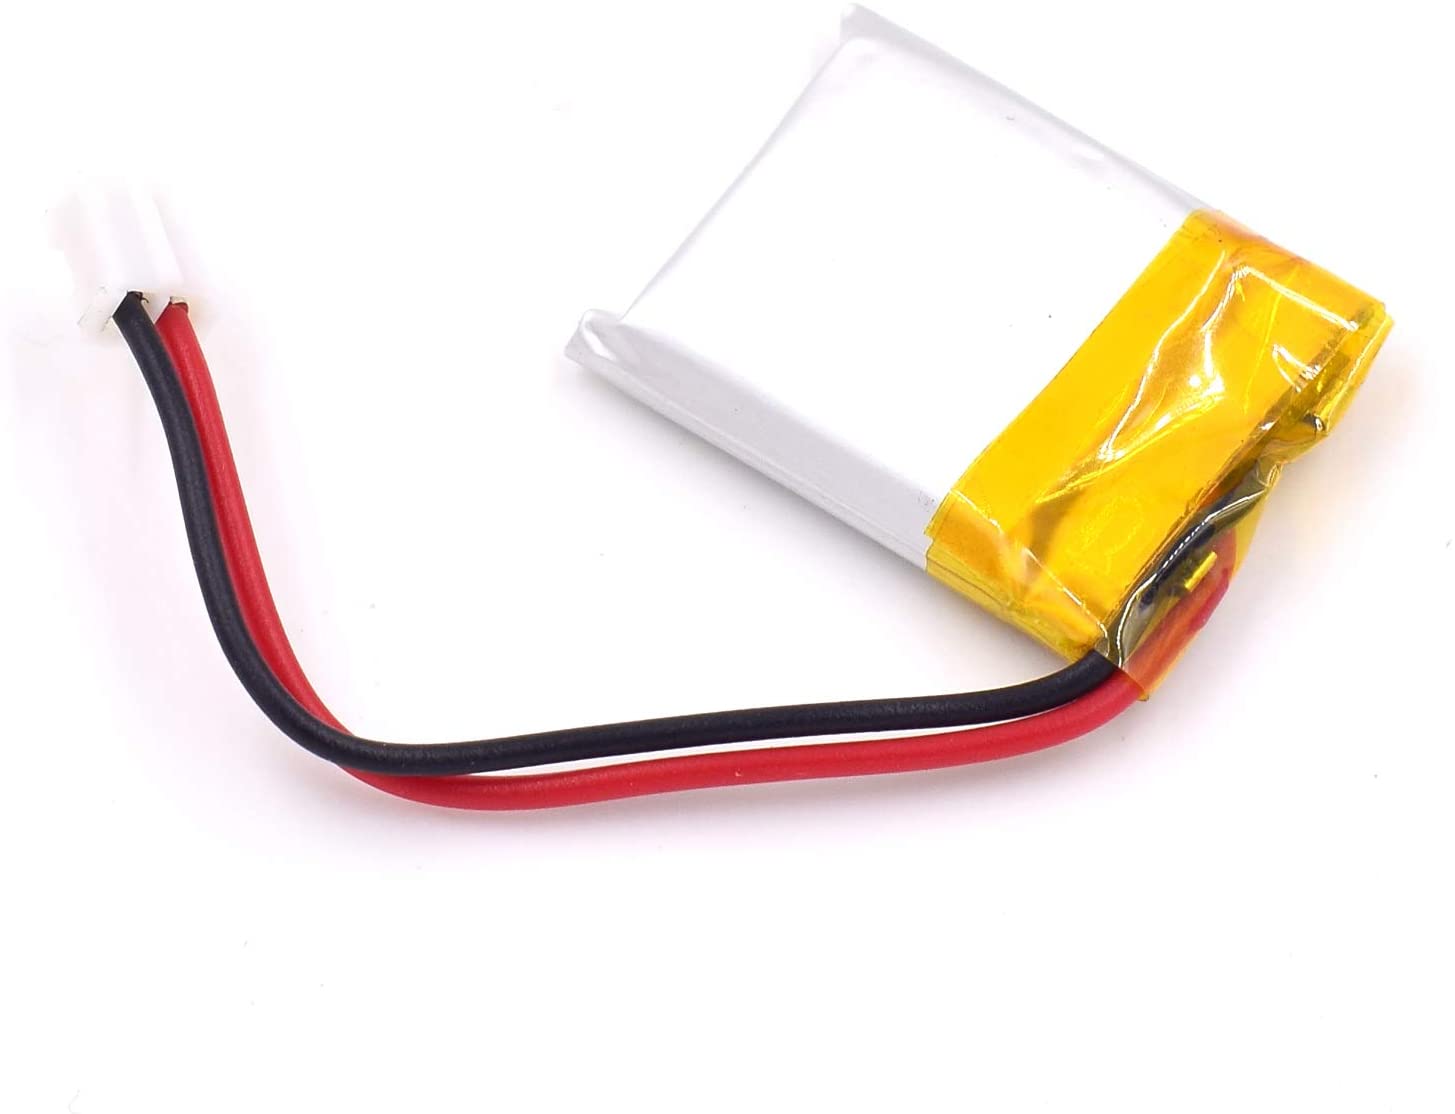 YDL 3.7V 200mAh 552025 Rechargeable Lipo Battery with JST Connector - YDL Battery